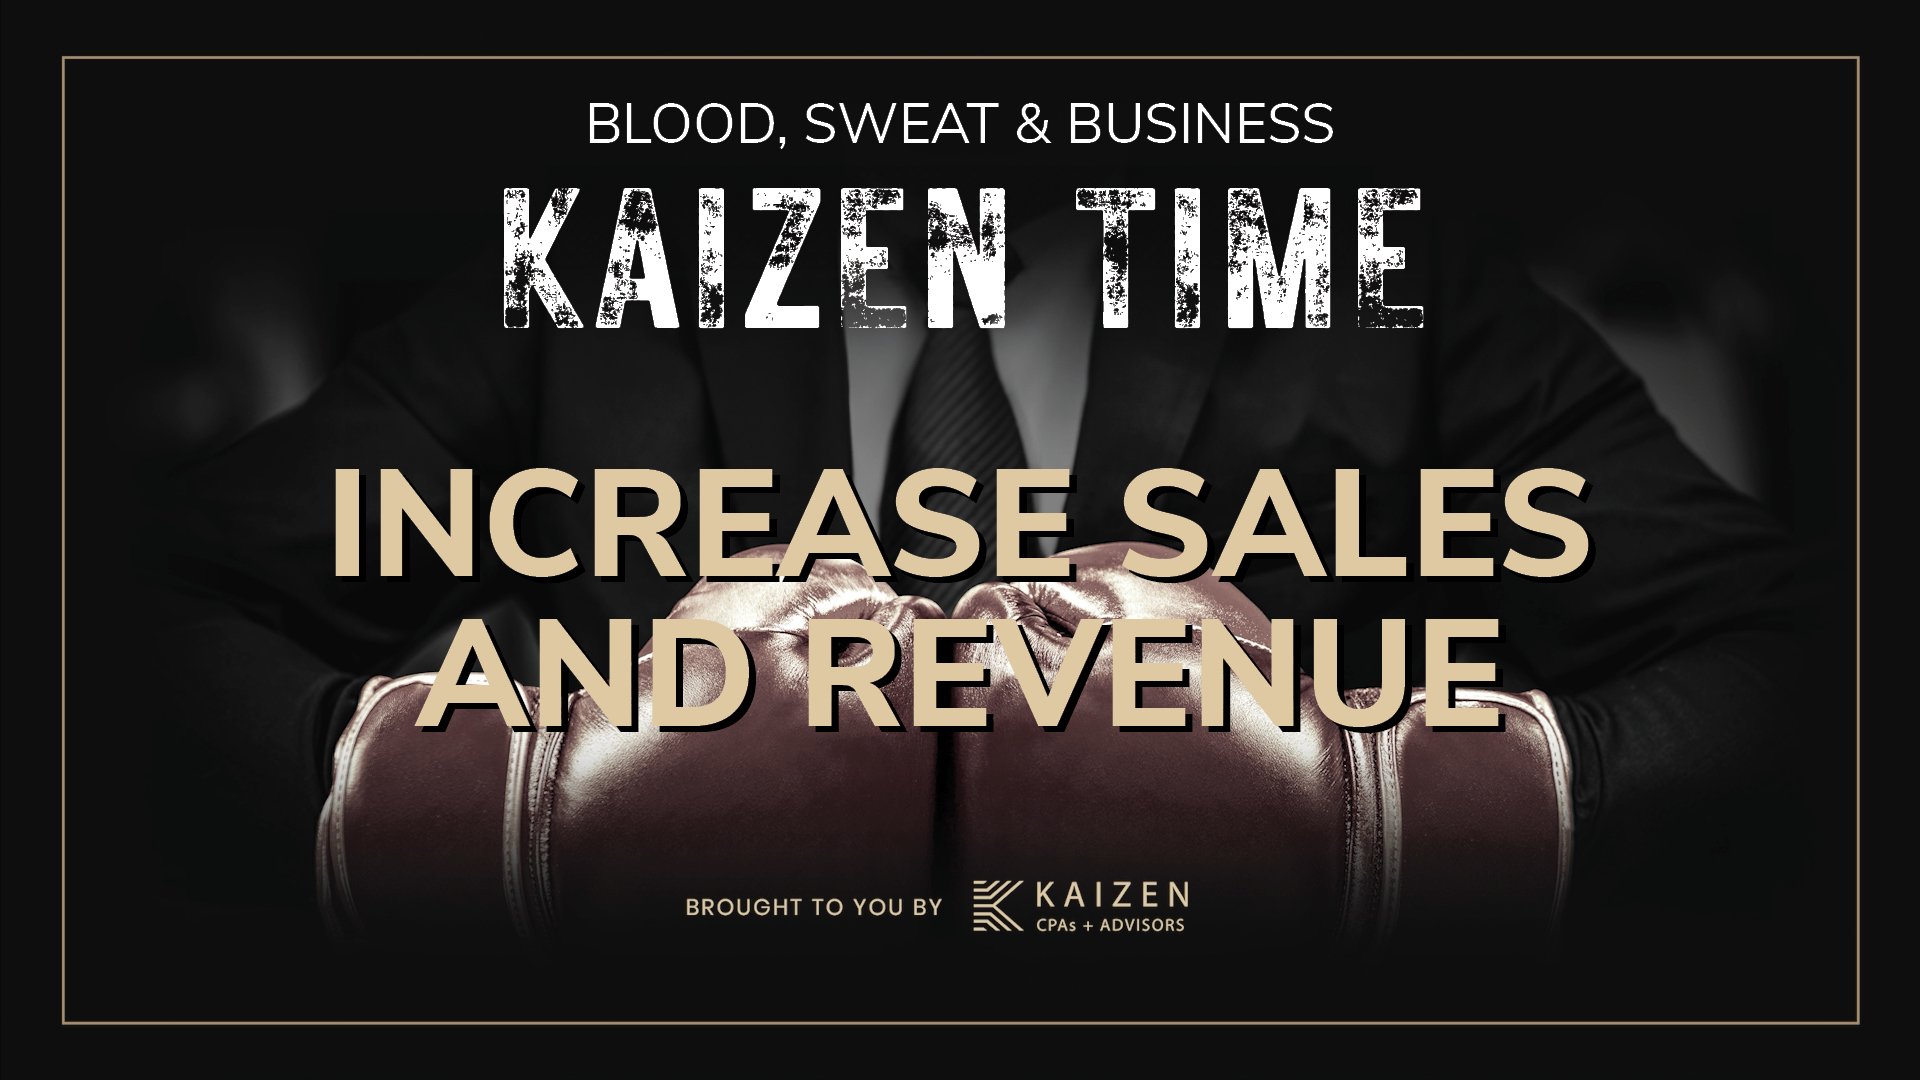 Increase sales and revenue for your business